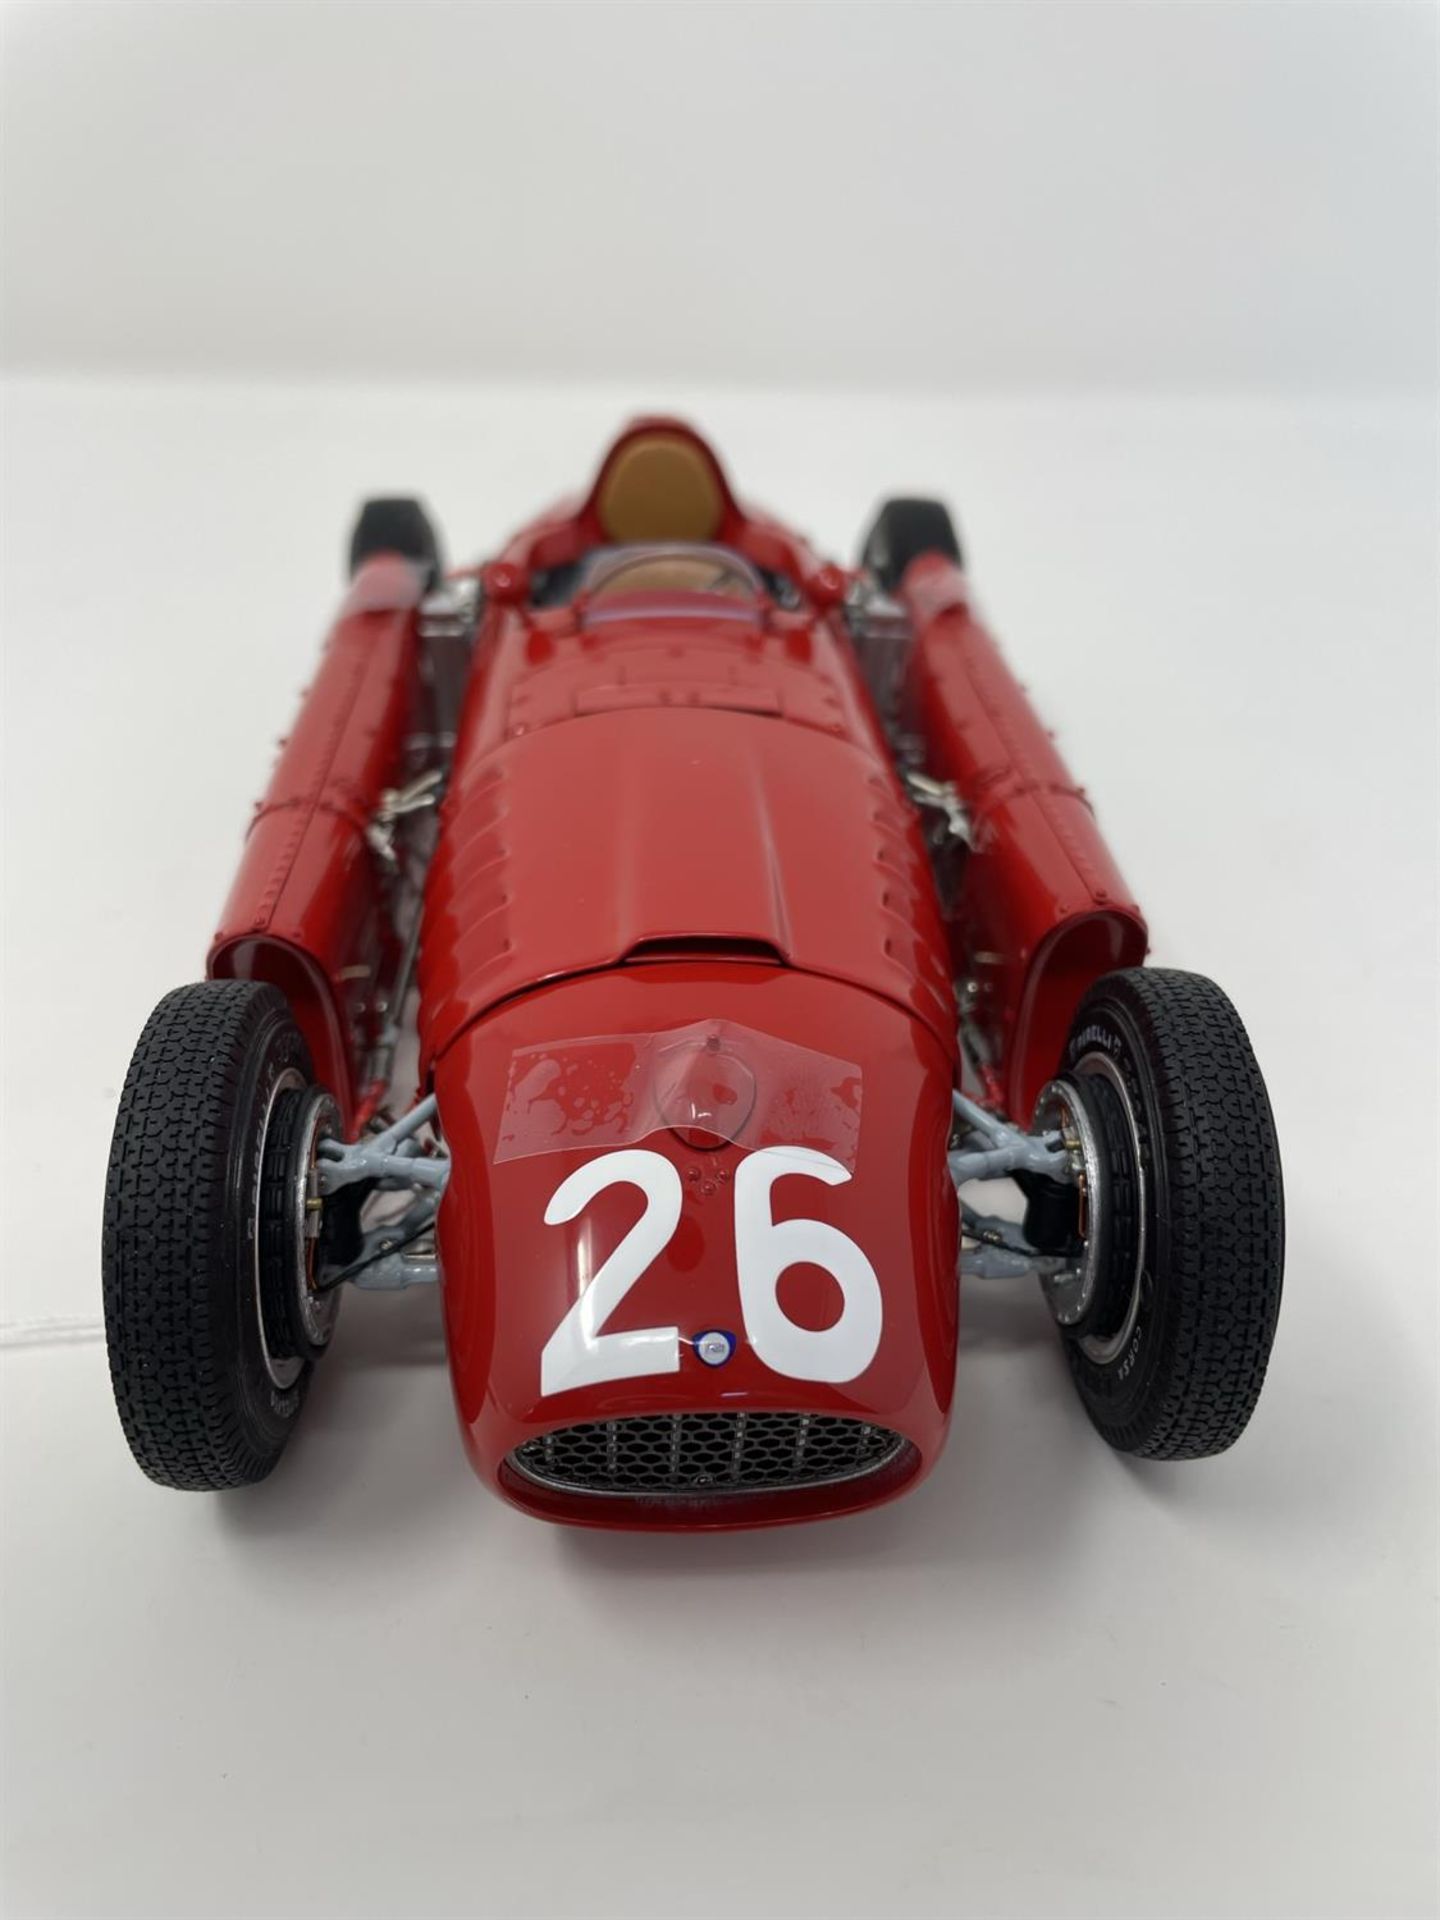 Lancia D50 1:18th Scale CMC Scale Model - Image 6 of 10